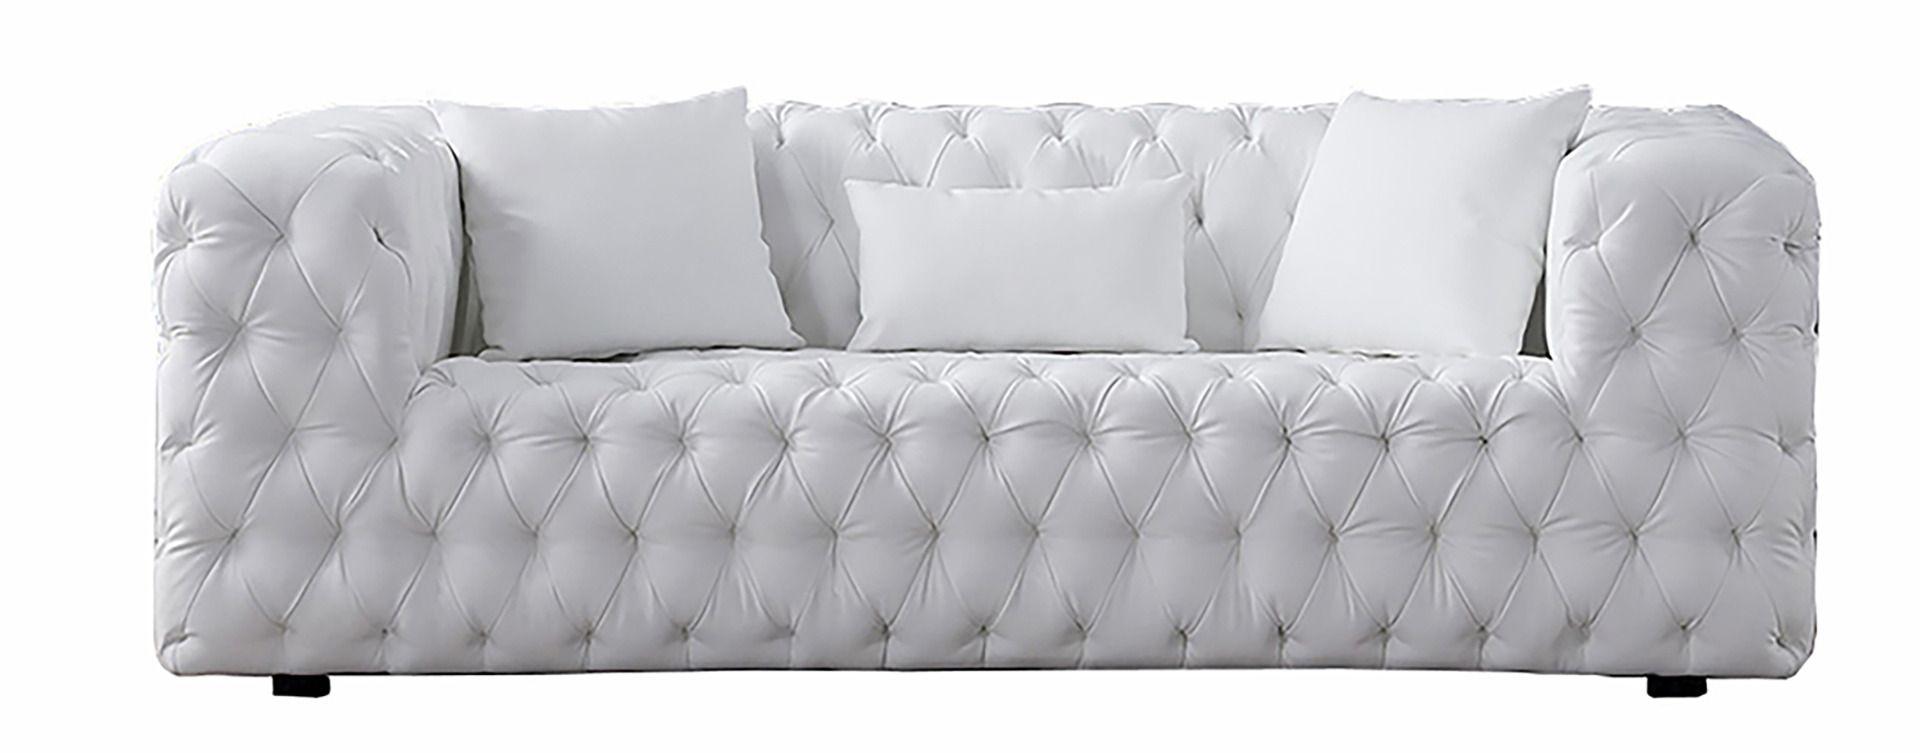 Contemporary, Modern Sofa AE-D821-W AE-D821-W-SF in White Bonded Leather